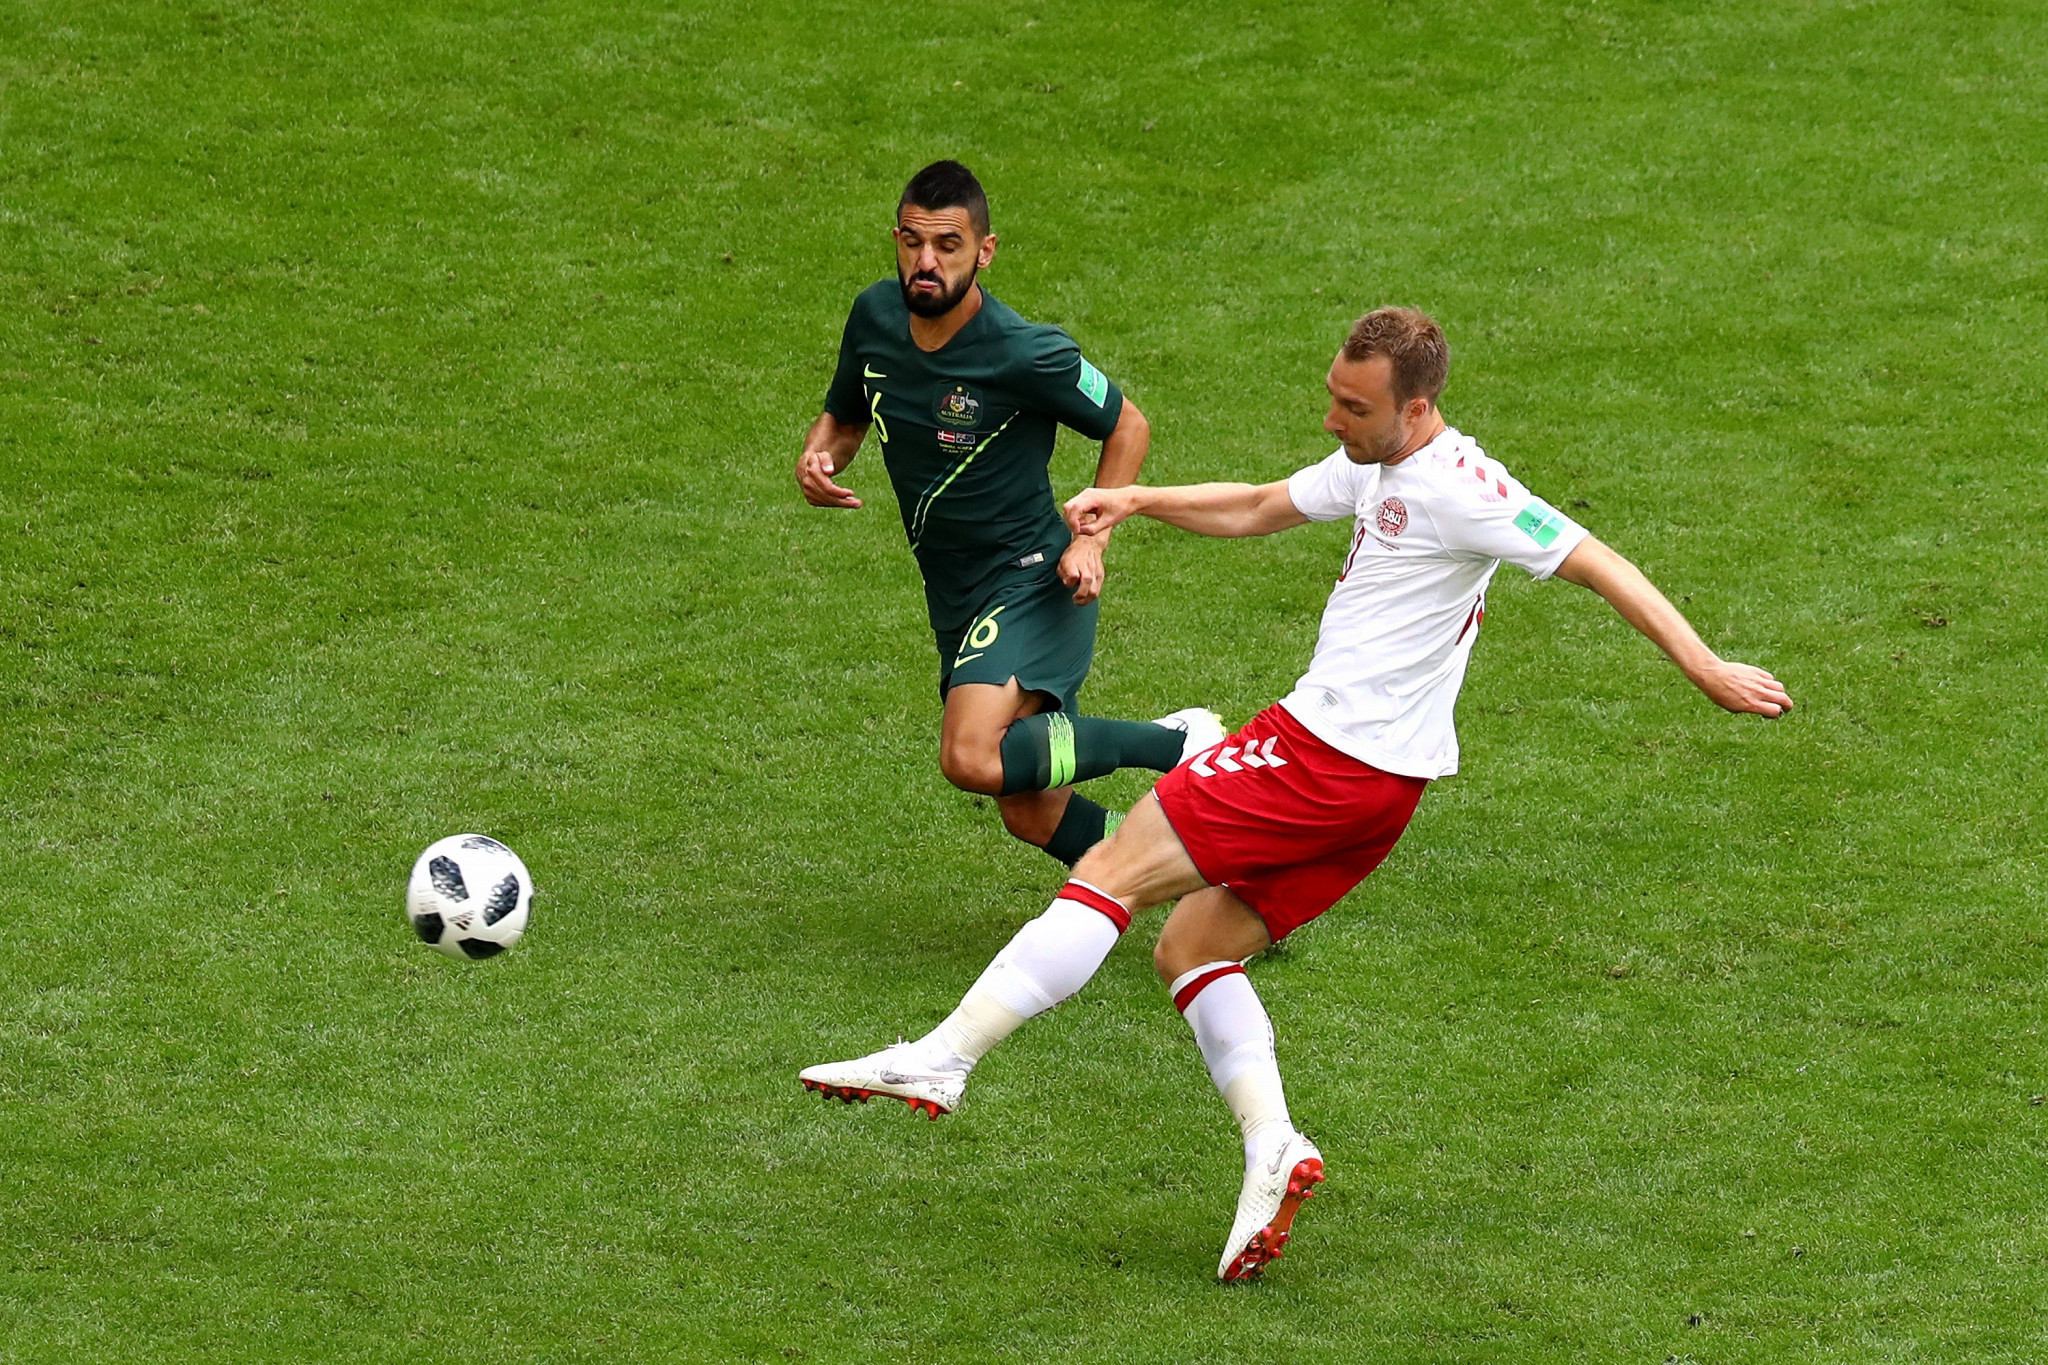 Christian Eriksen had put Denmark ahead with a superb finish in the seventh minute ©Getty Images